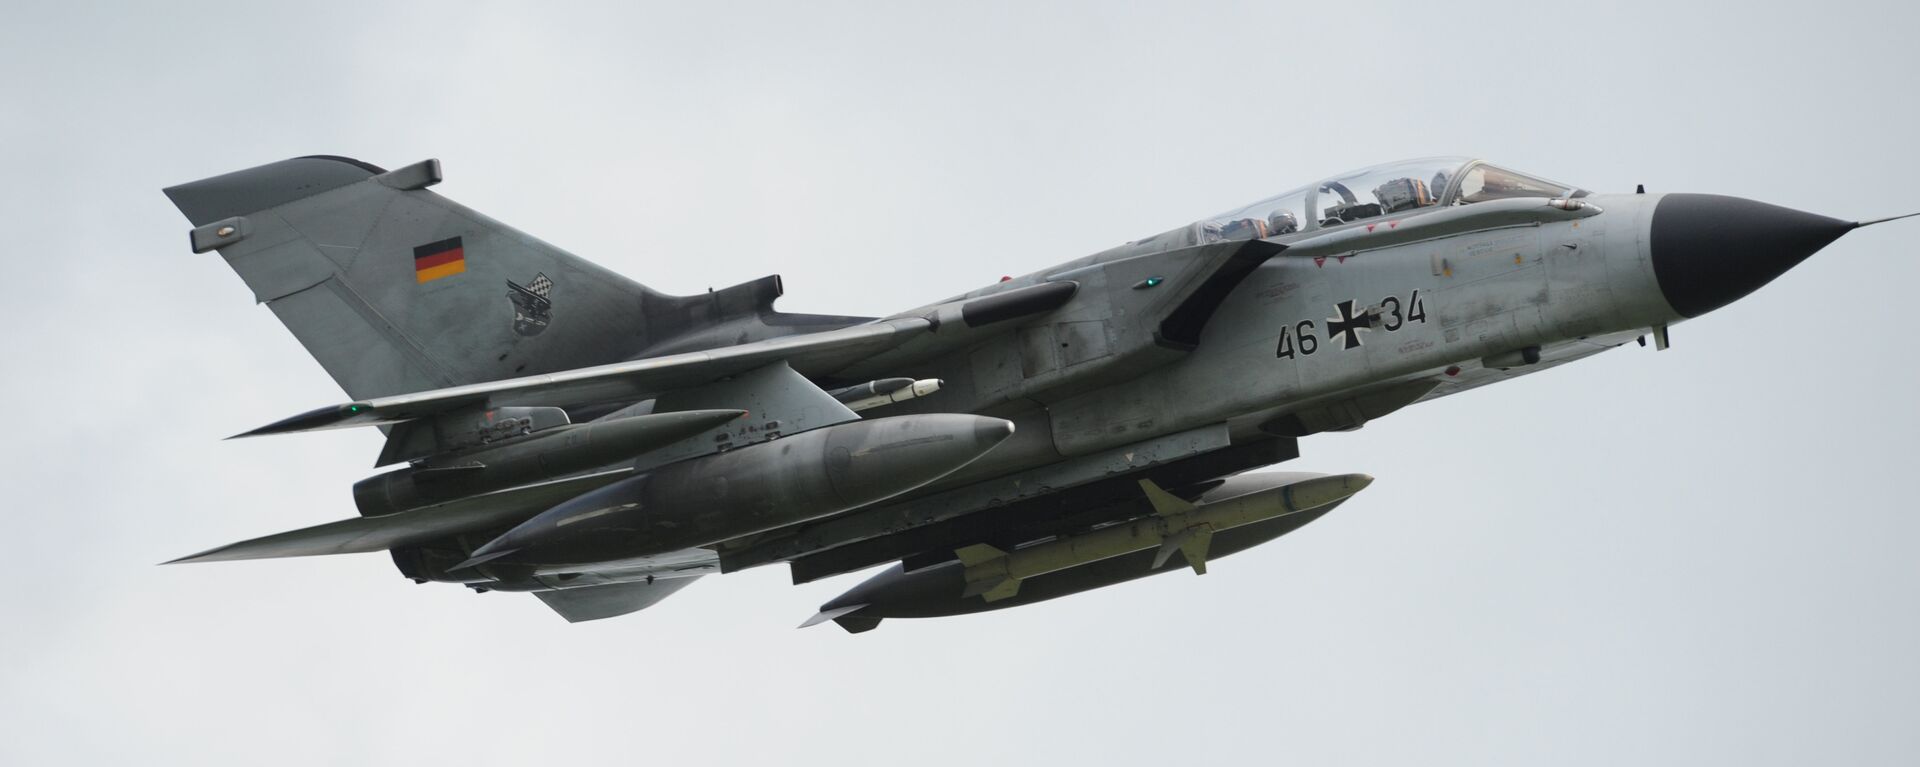 Picture taken on June 22, 2010 shows a Tornado fighter bomber of the German armed forces Bundeswehr during an exercise near Messstetten, southern Germany. - 俄罗斯卫星通讯社, 1920, 19.10.2019